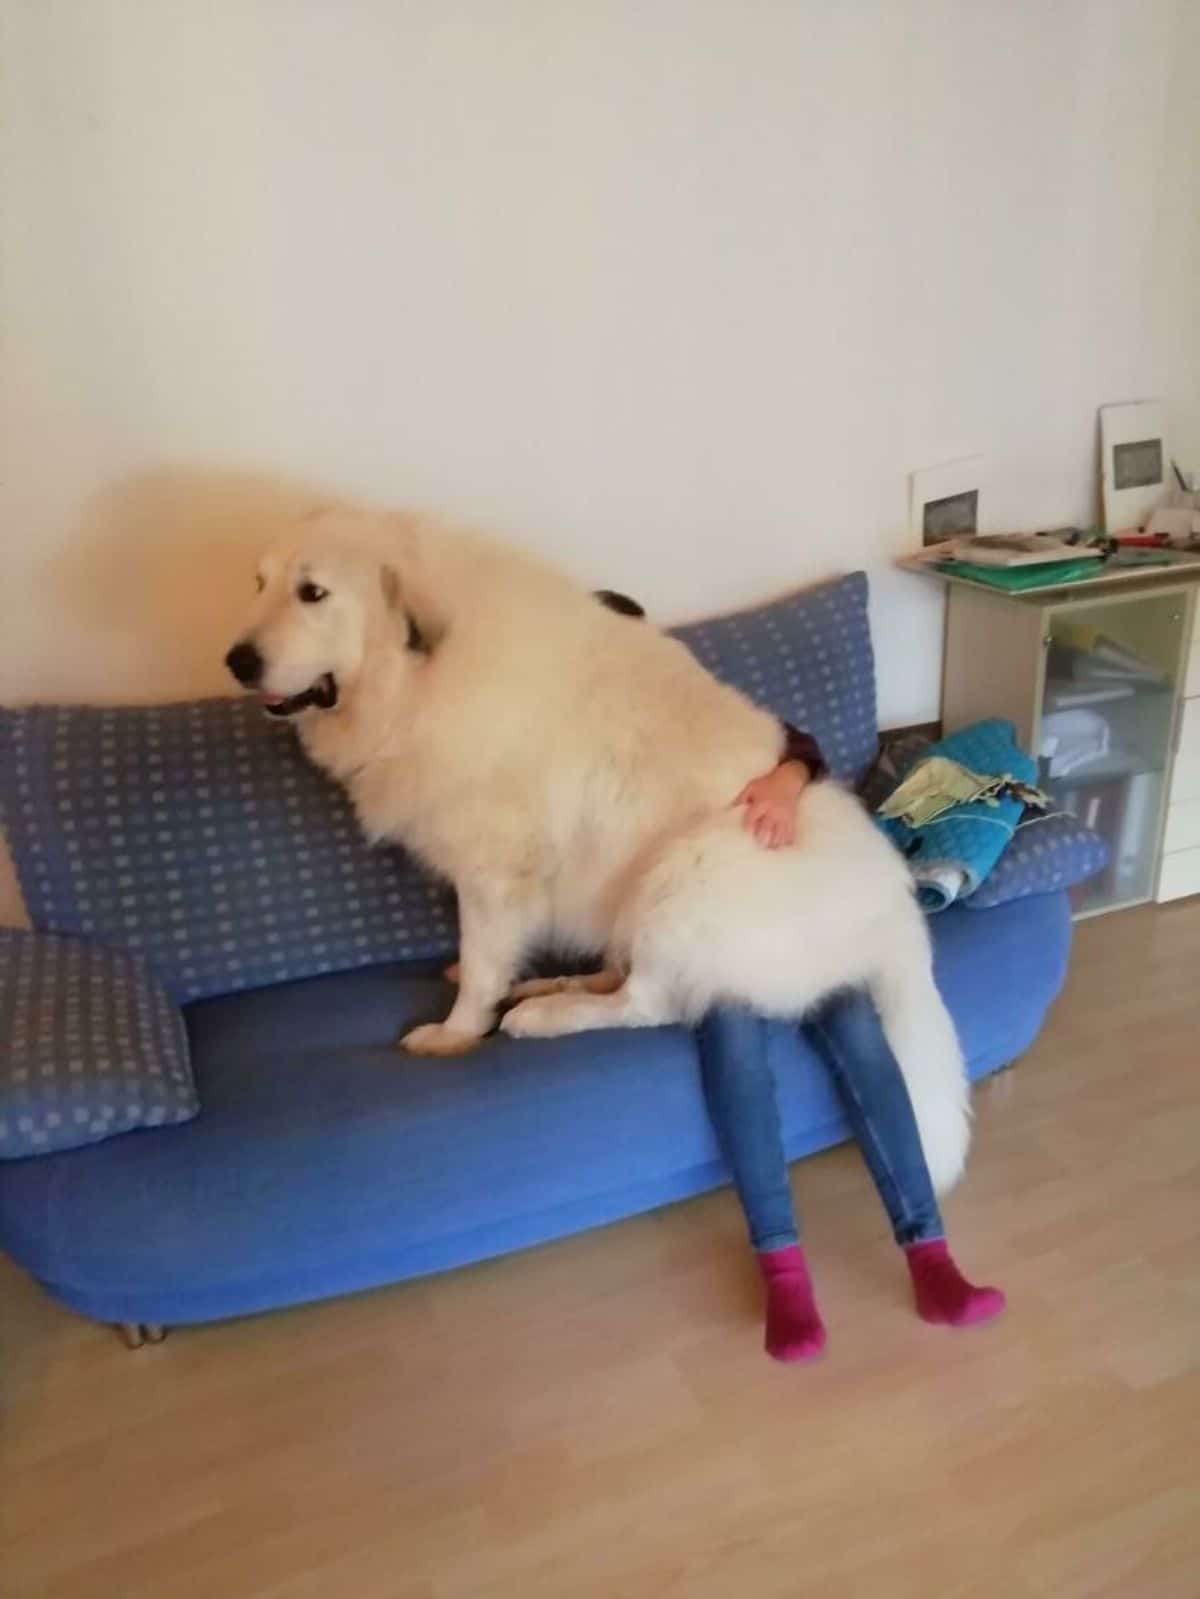 white fluffy dog sitting on a person on a blue couch